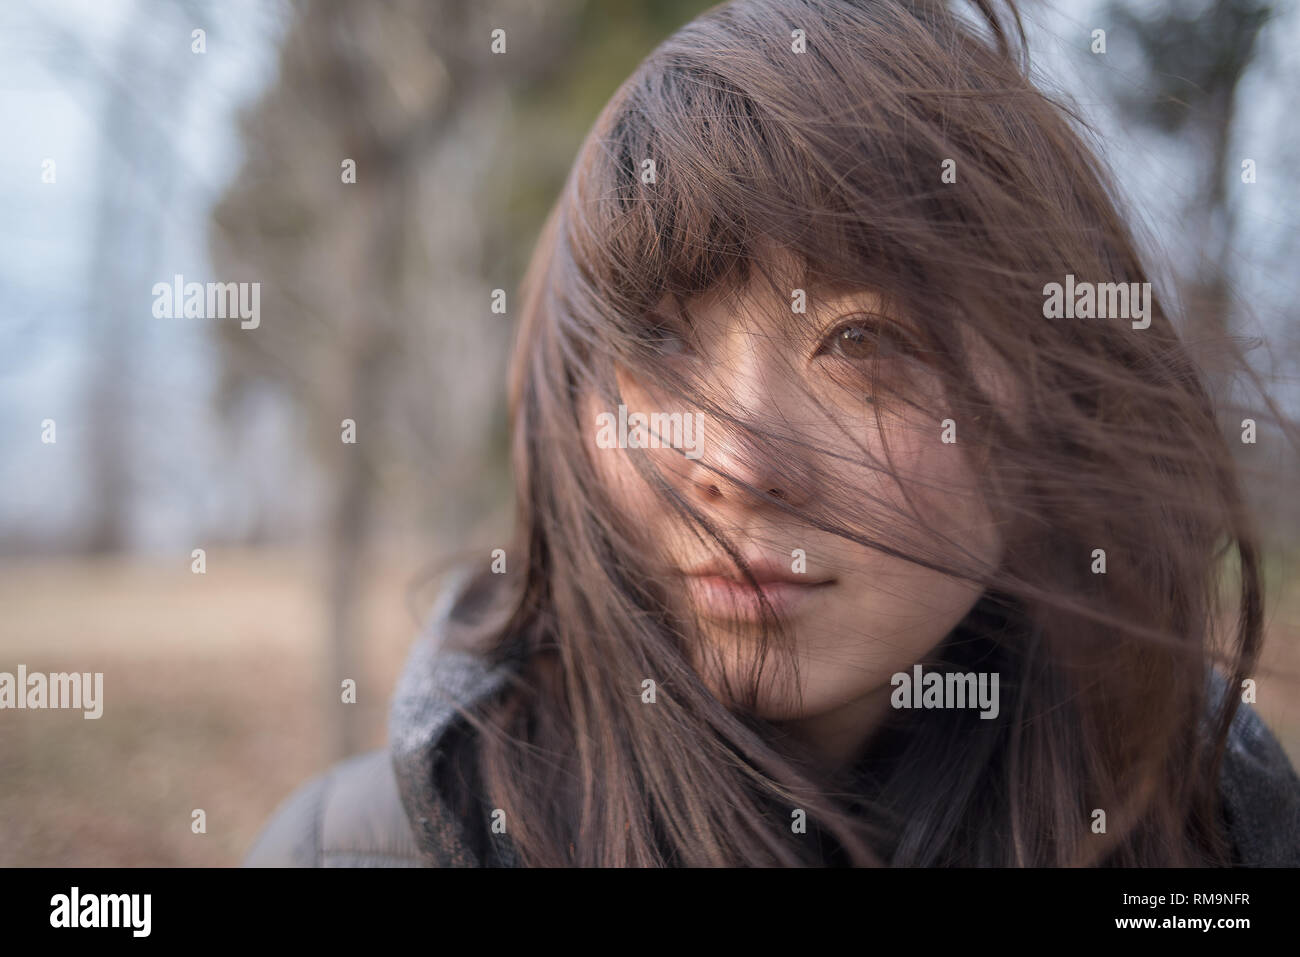 Outside scene in nature with beautiful and cute young woman and her brown hair in the wind contemplating the scenery. Japan. Stock Photo